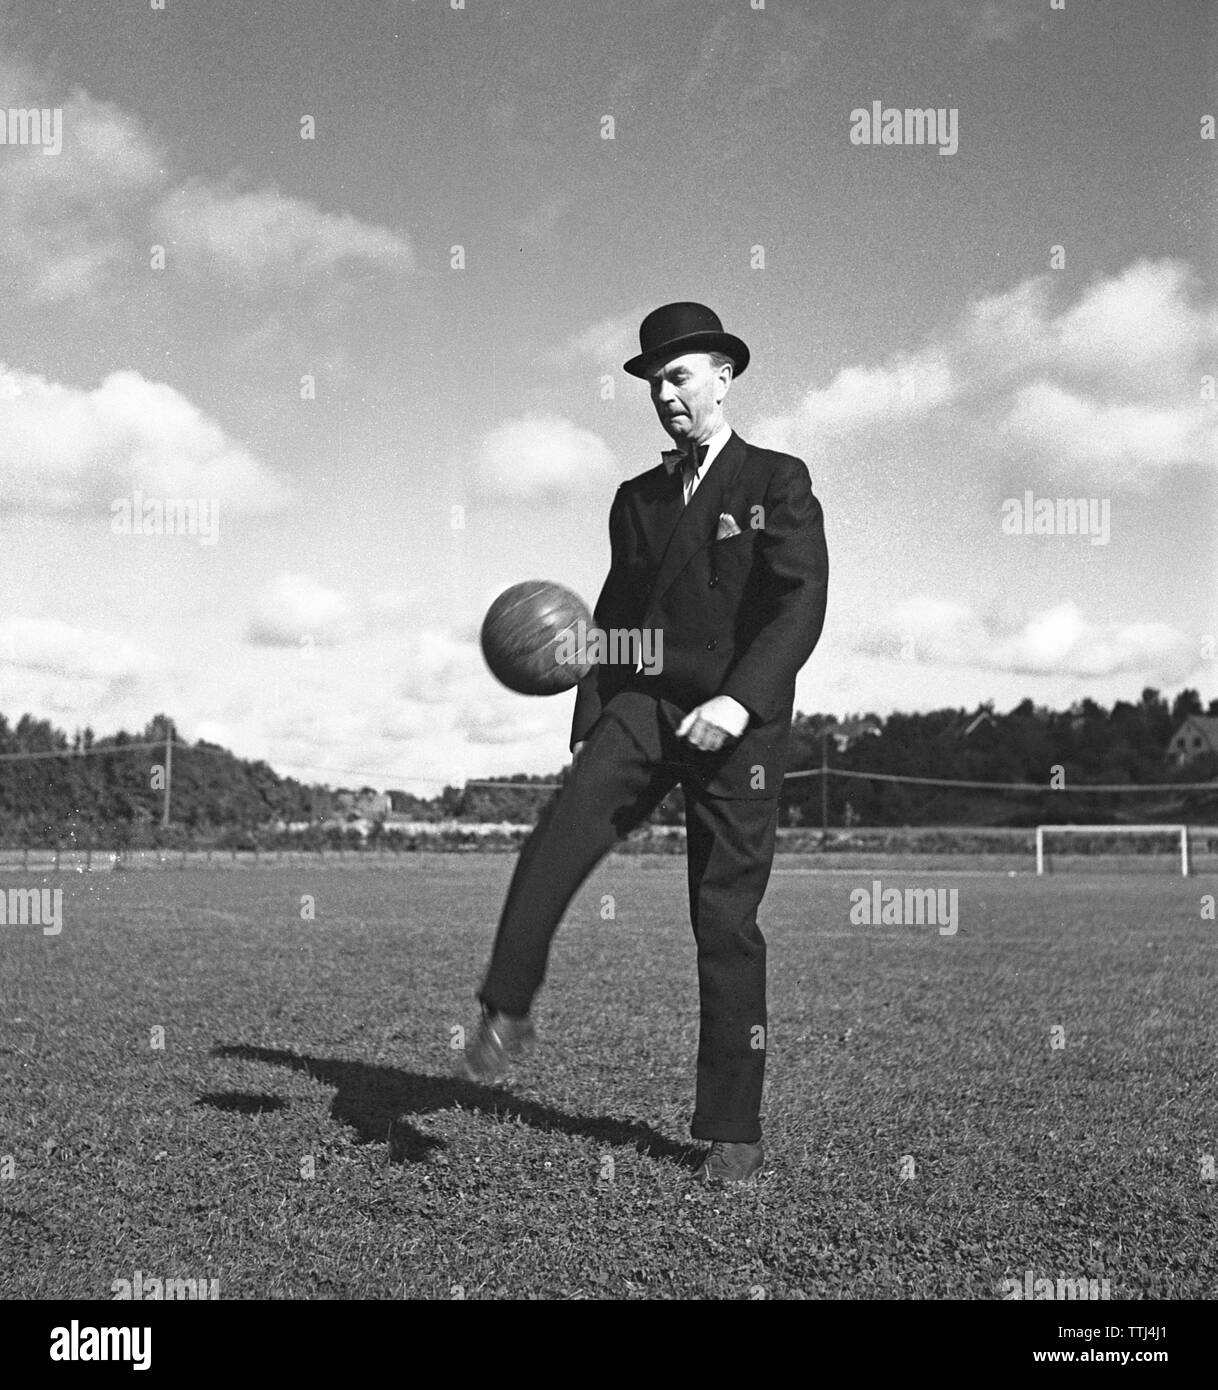 1940s soccer player. A gentleman dressed in a suit and a bowler hat is kicking a football in the air. Sweden 1944 Kristoffersson F104-1 Stock Photo